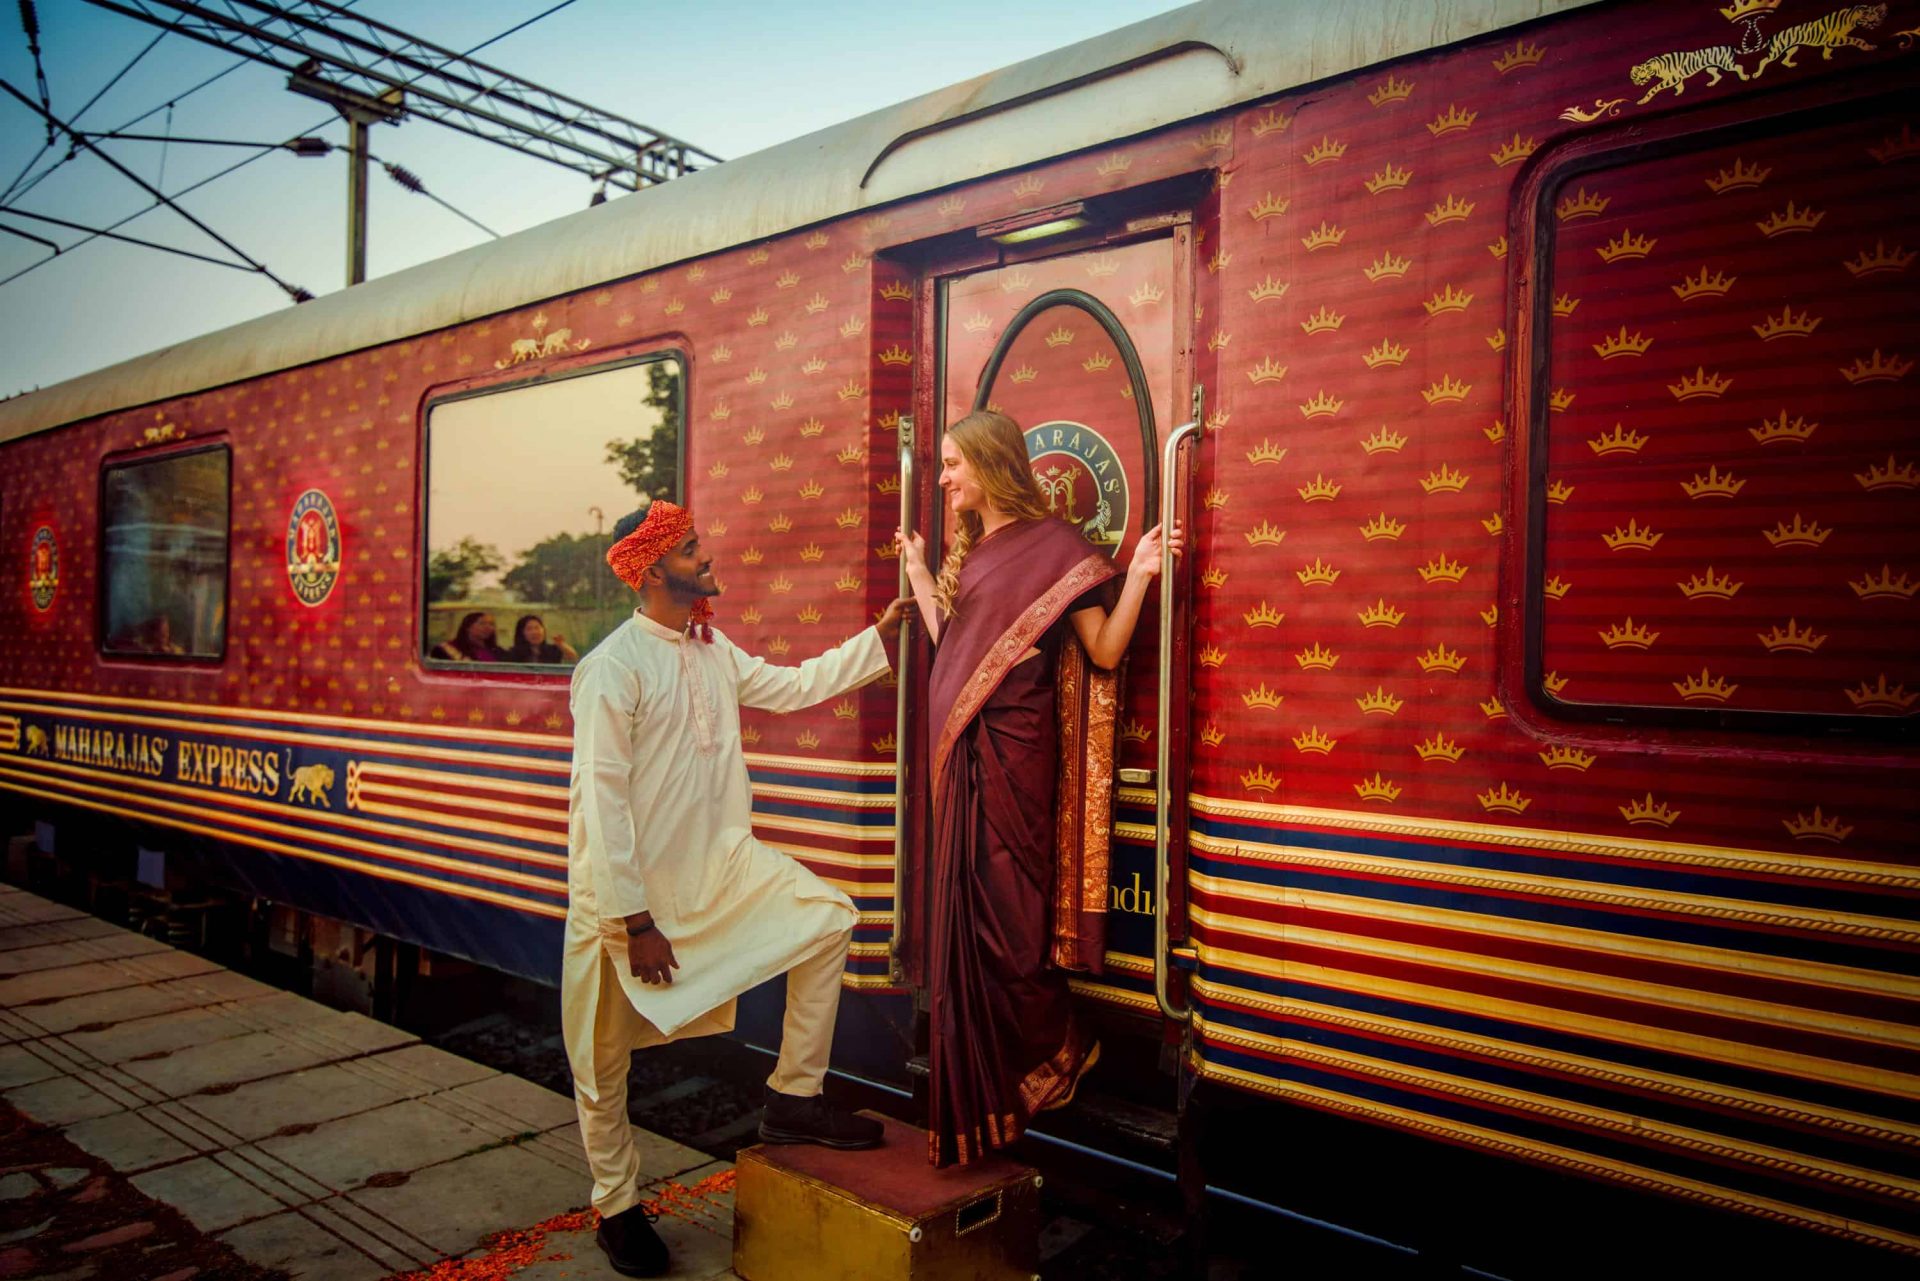 Journey on the Maharaja Express train "Magnificent India"!